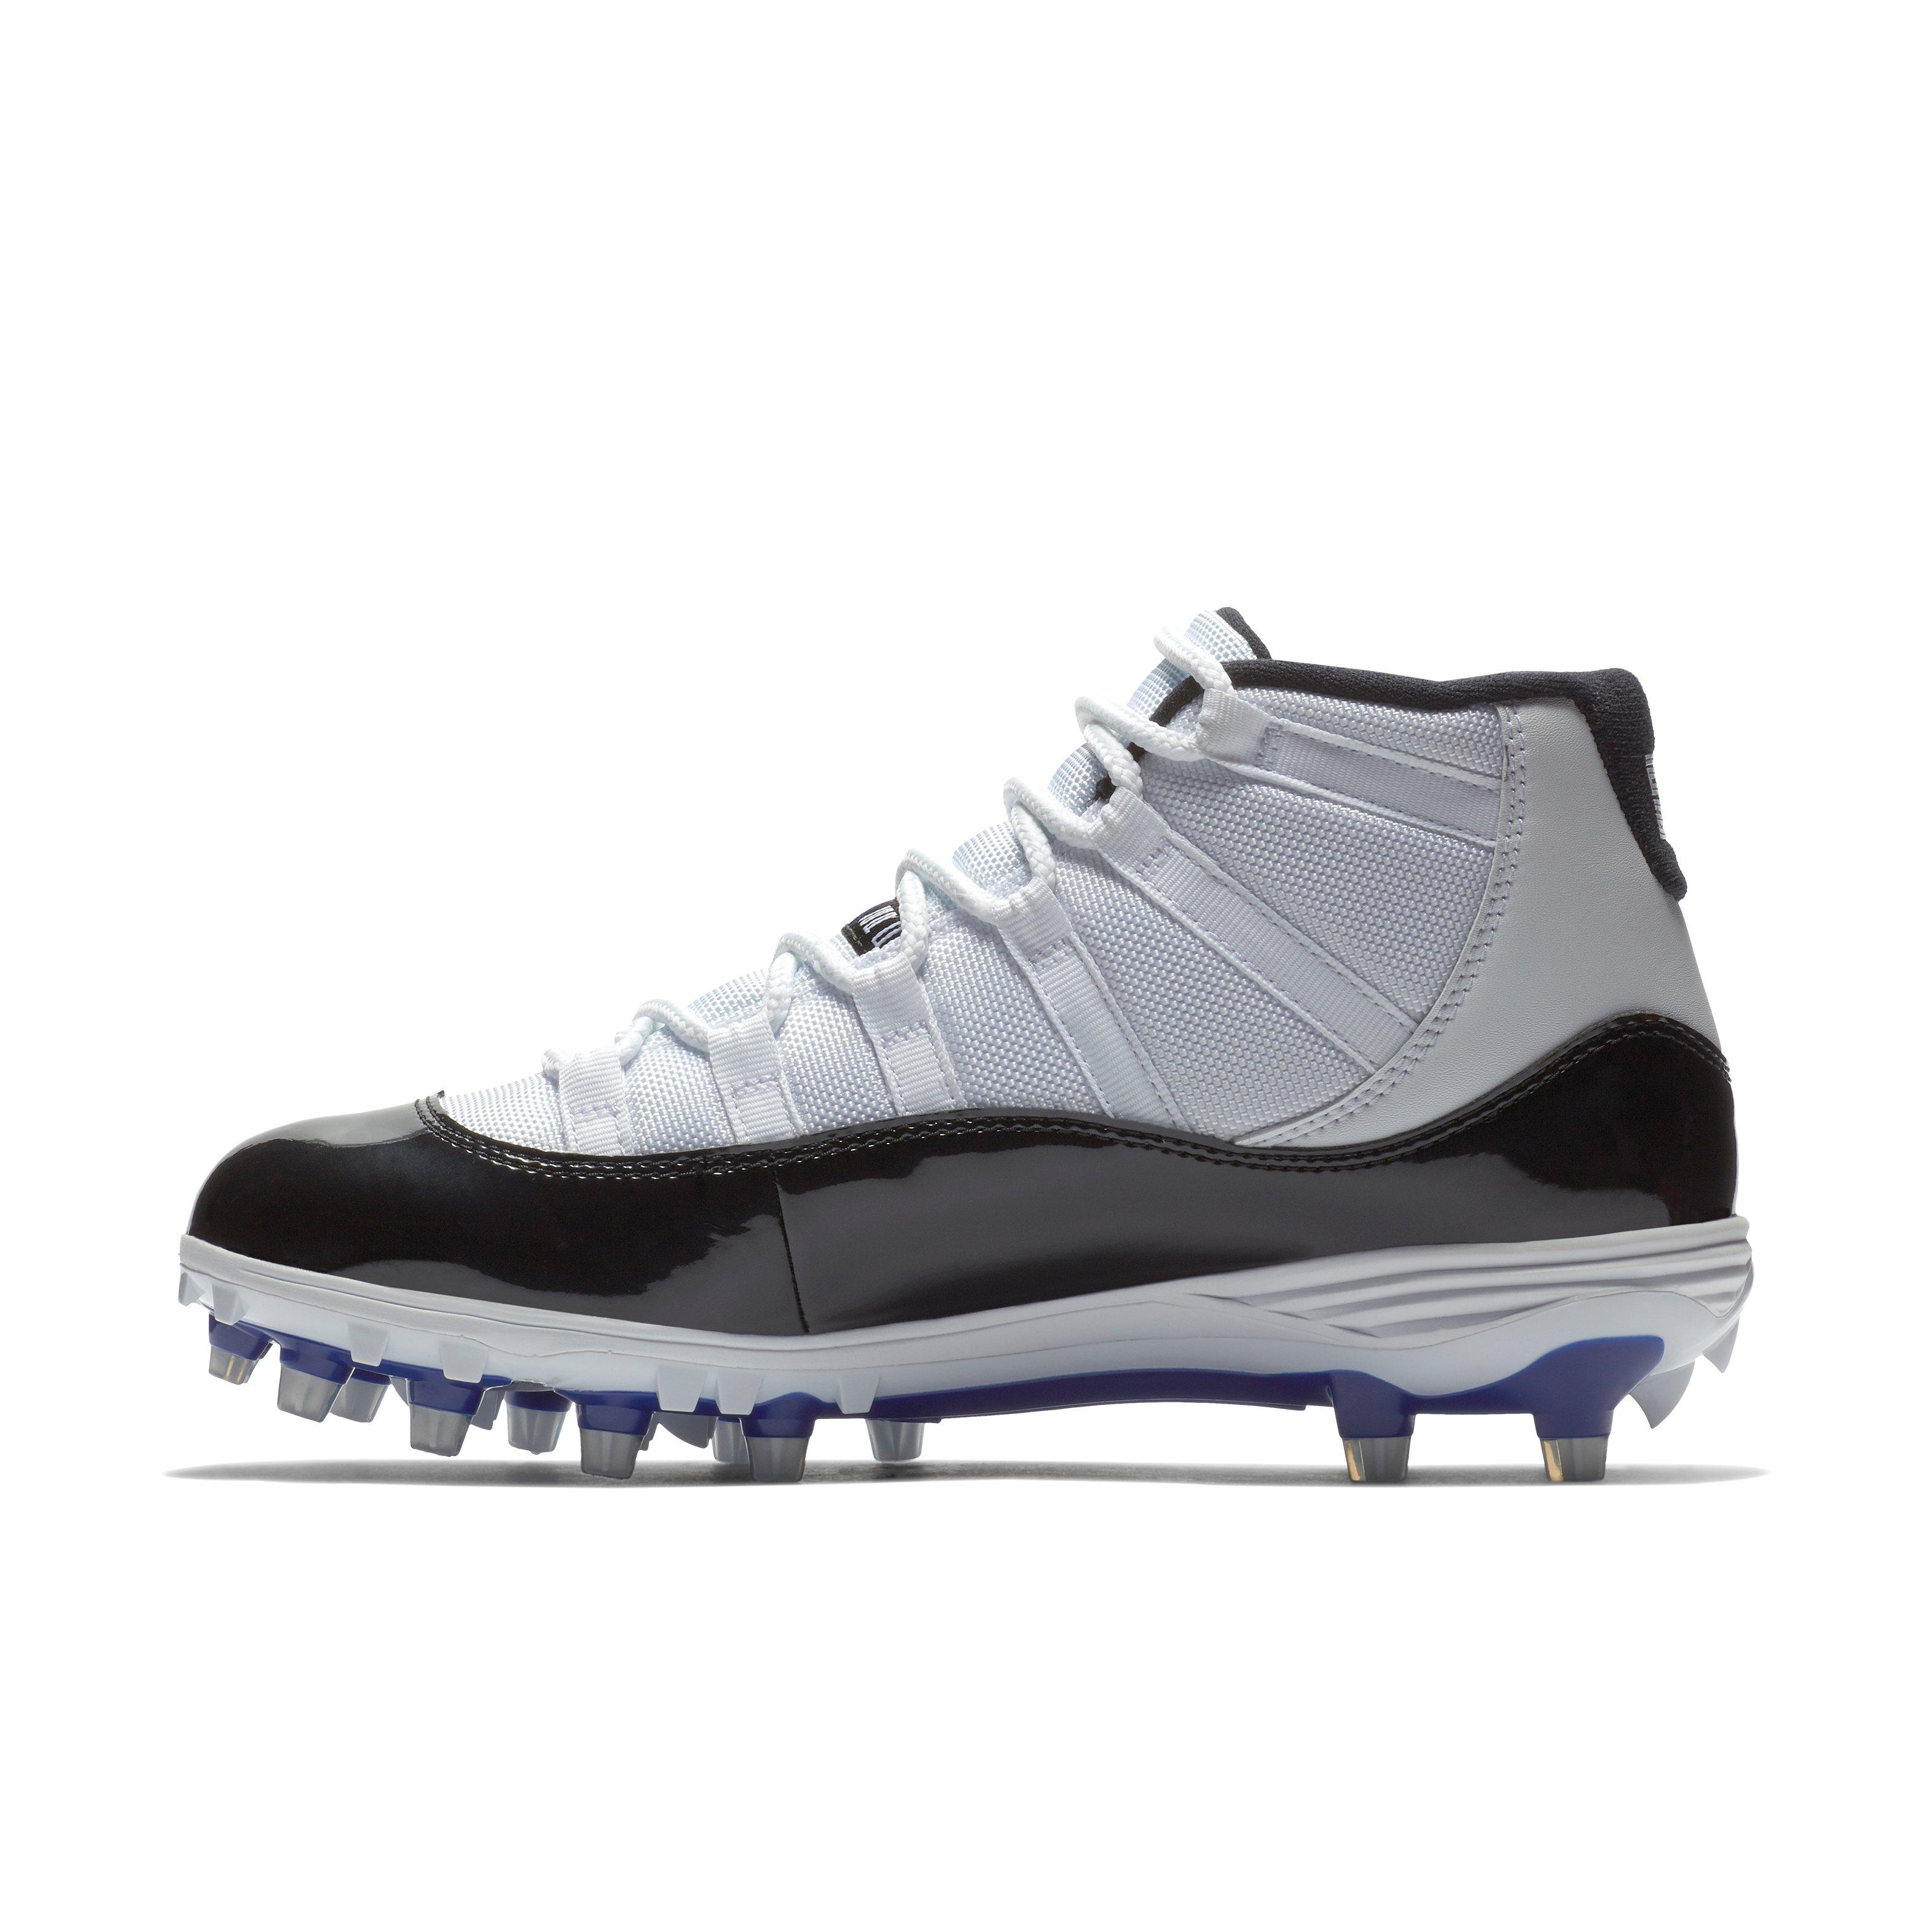 concord 11 football cleats